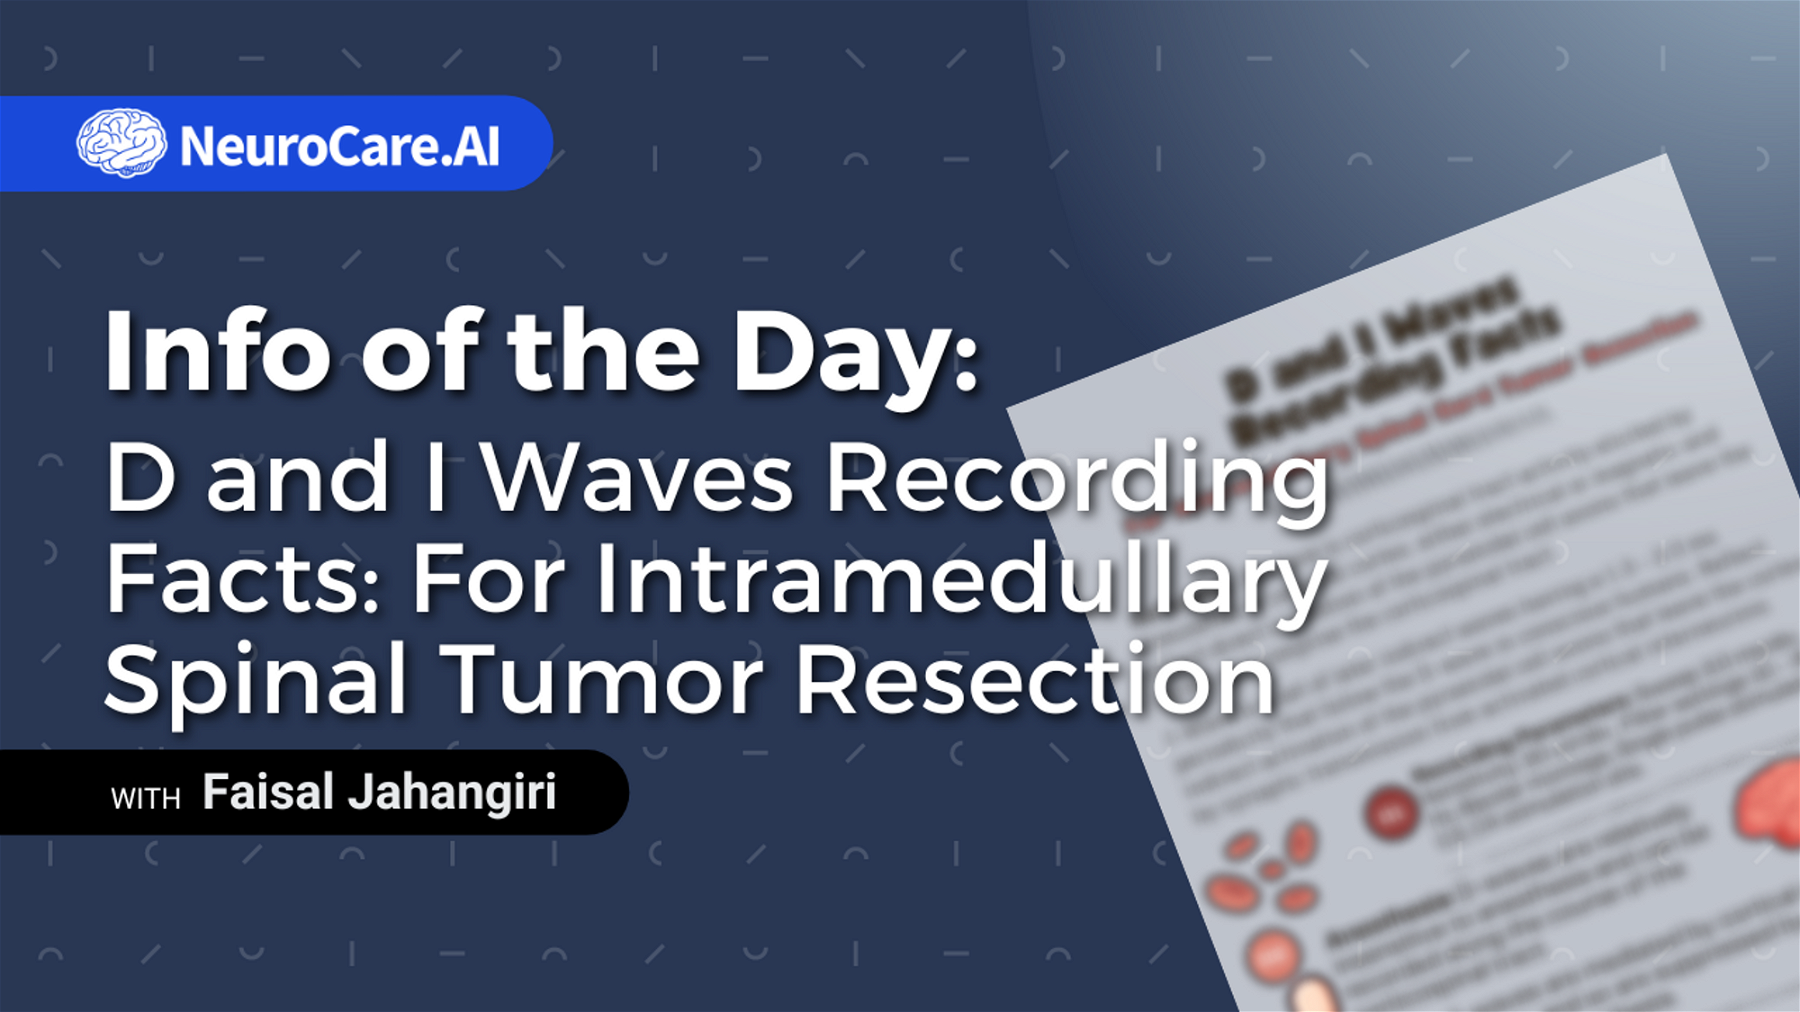 Info of the Day: "D and I Waves Recording Facts: For Intramedullary Spinal Tumor Resection"